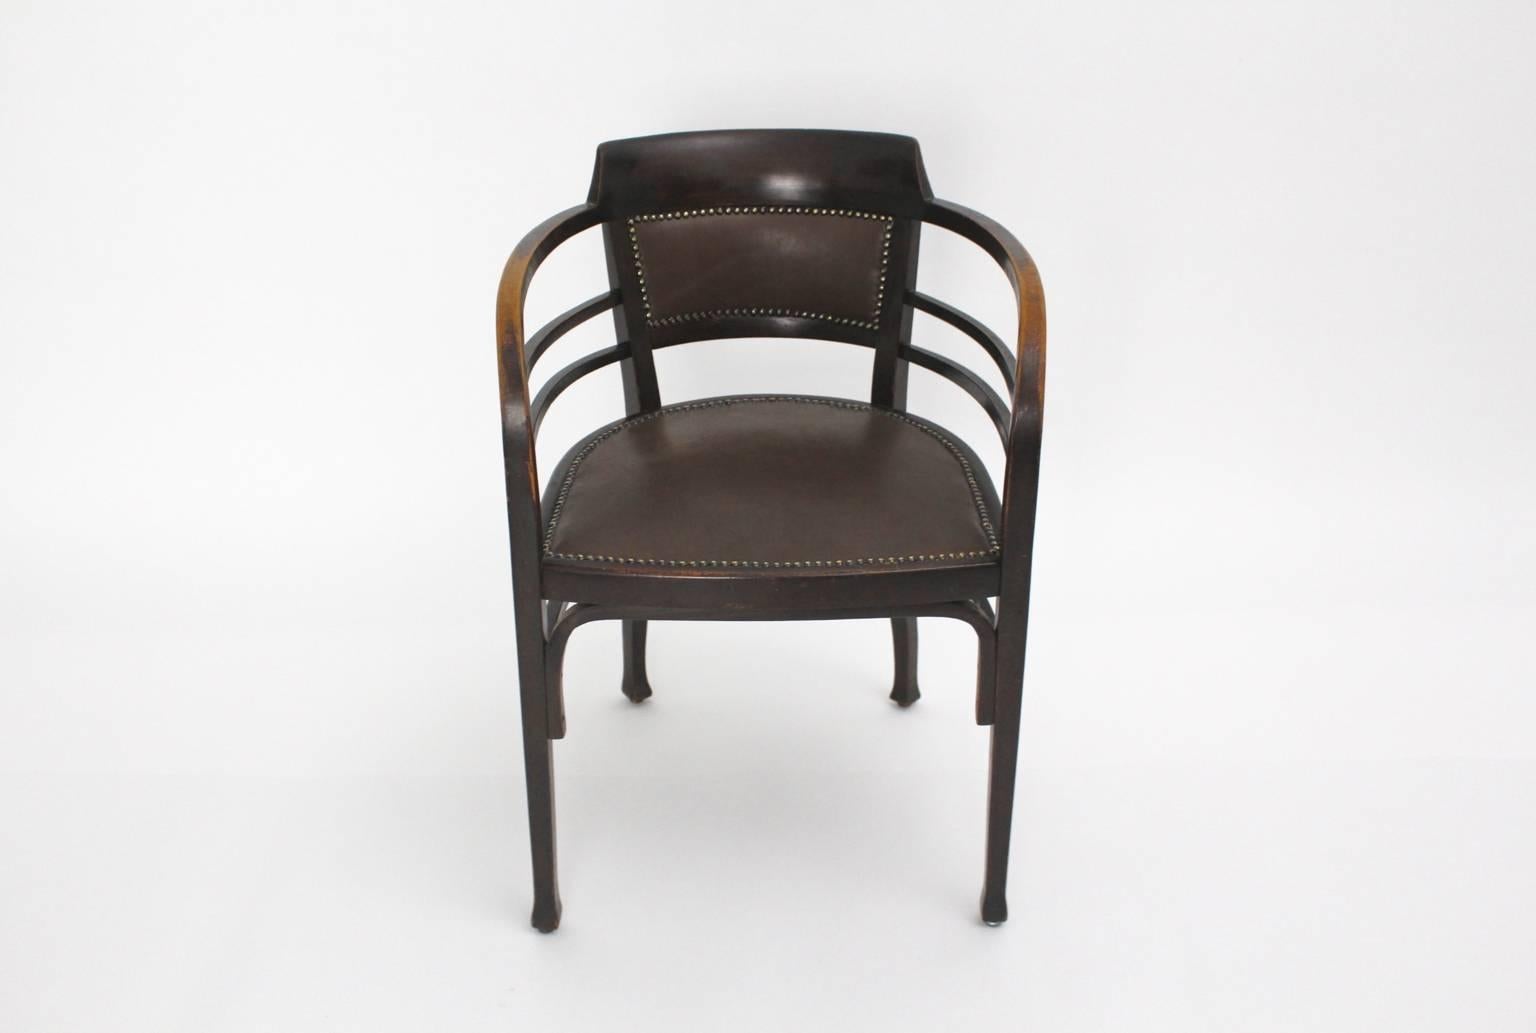 Jugendstil vintage armchair or desk chair or office chair from stained beech, which was designed by the Viennese Secessionist Josef Maria Olbrich and
executed by Gebr. Thonet.
Josef Maria Olbrich studied under Otto Wagner, who was the Co founder and